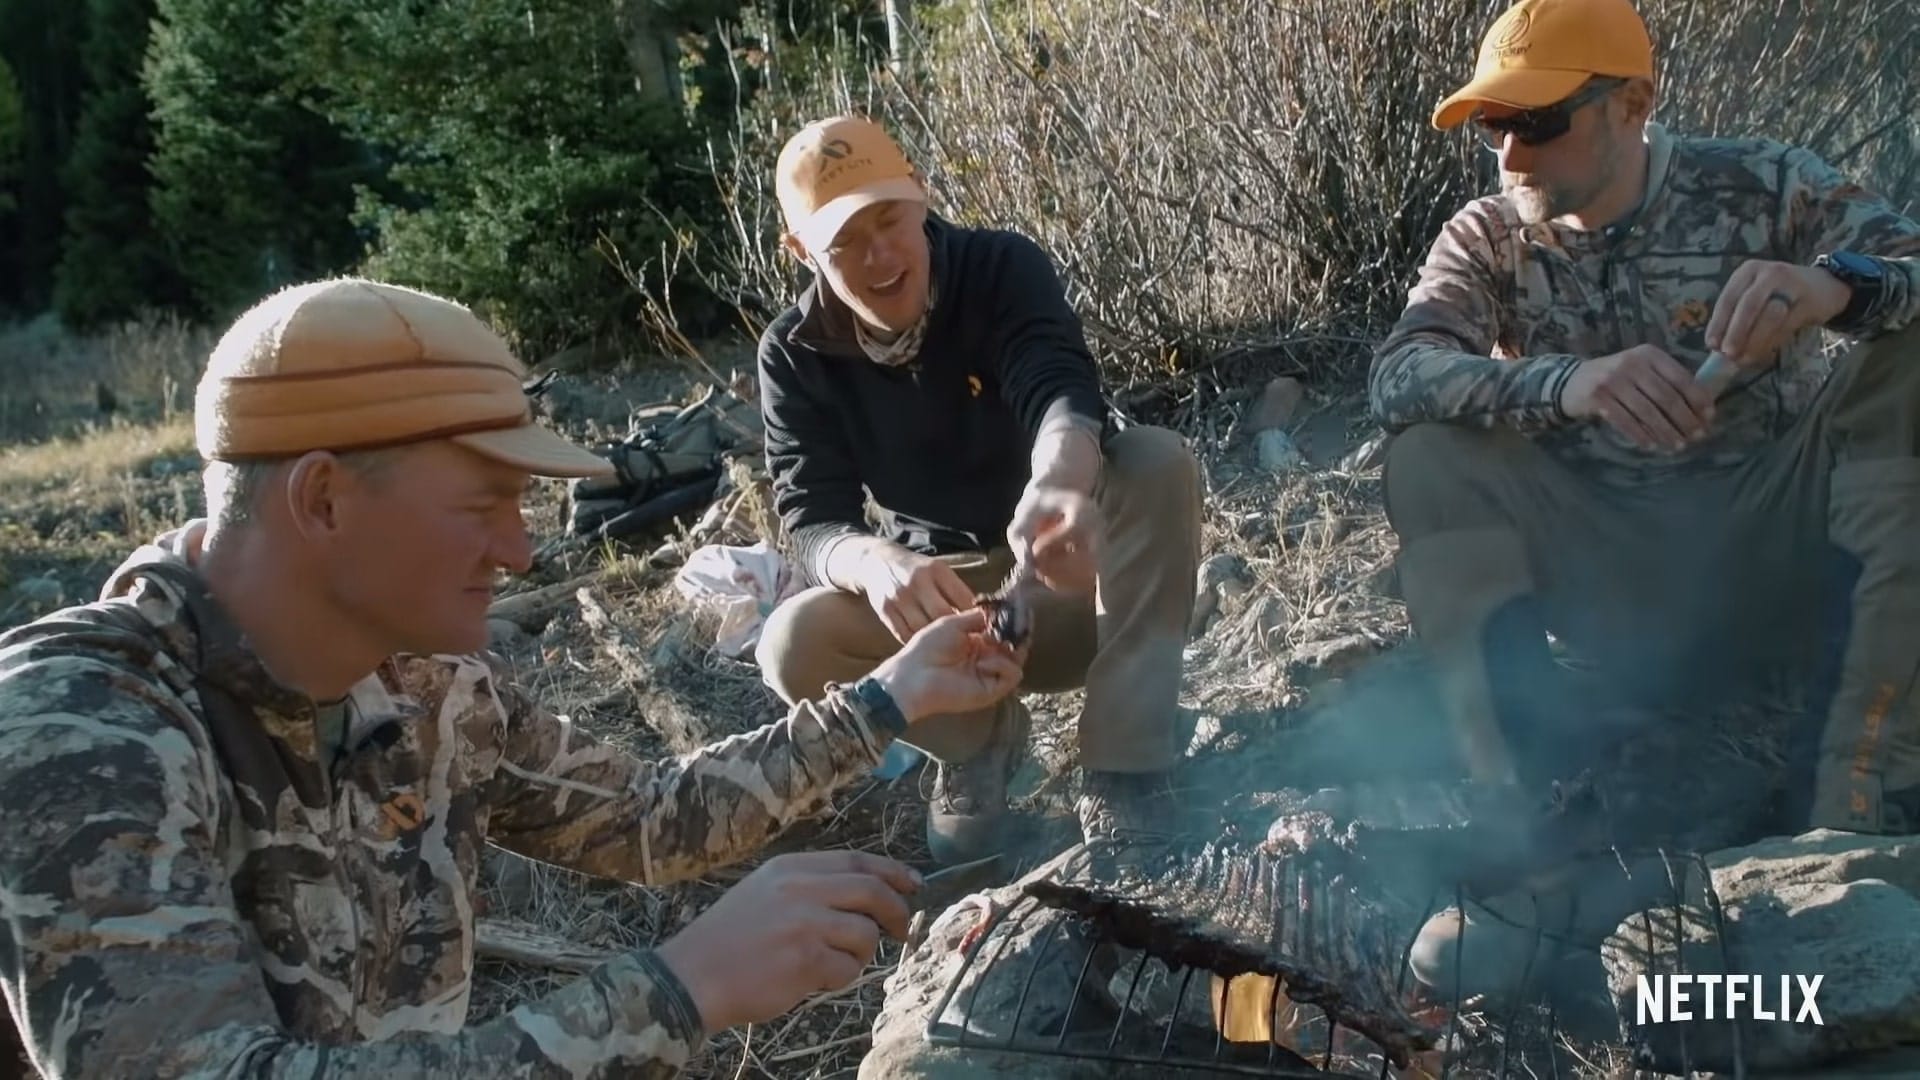 Netflix MeatEater Season 9 Trailer, Netflix Food Shows, Netflix Hunting Shows, Coming to Netflix in September 2020